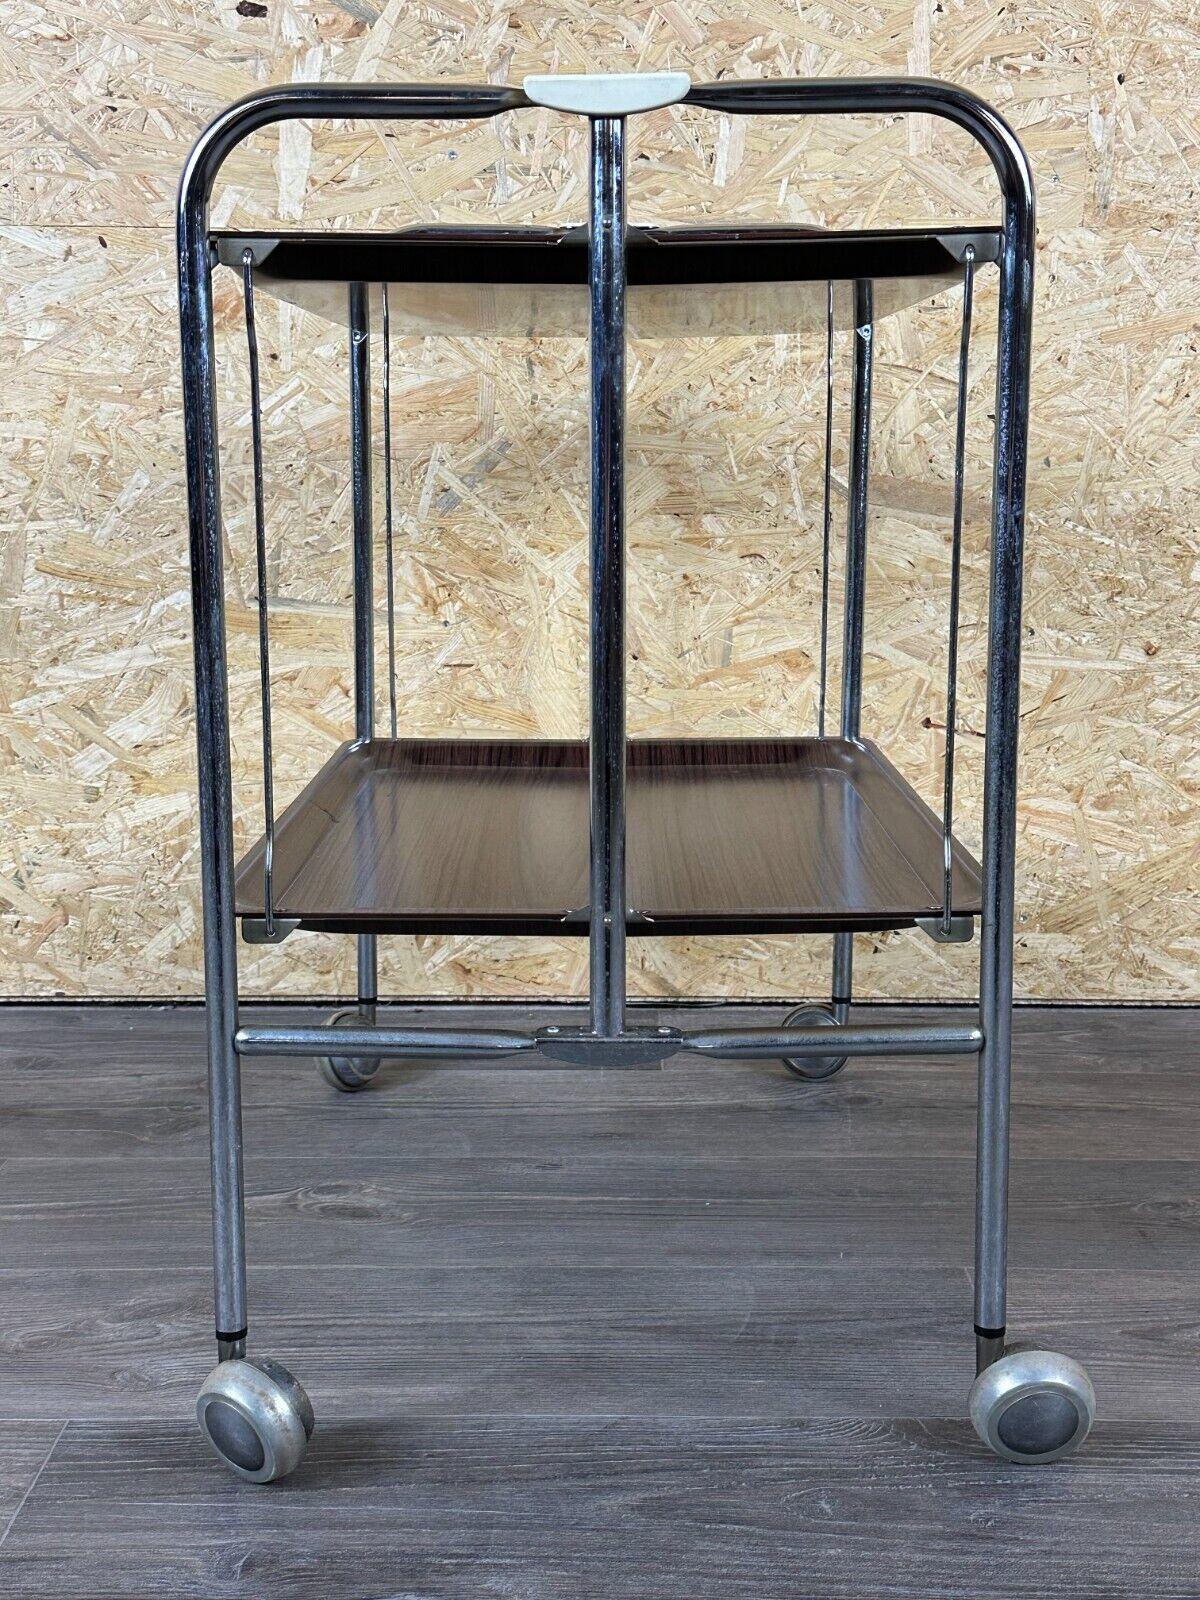 60s 70s serving trolley dinette side table space age brown design im Angebot 1